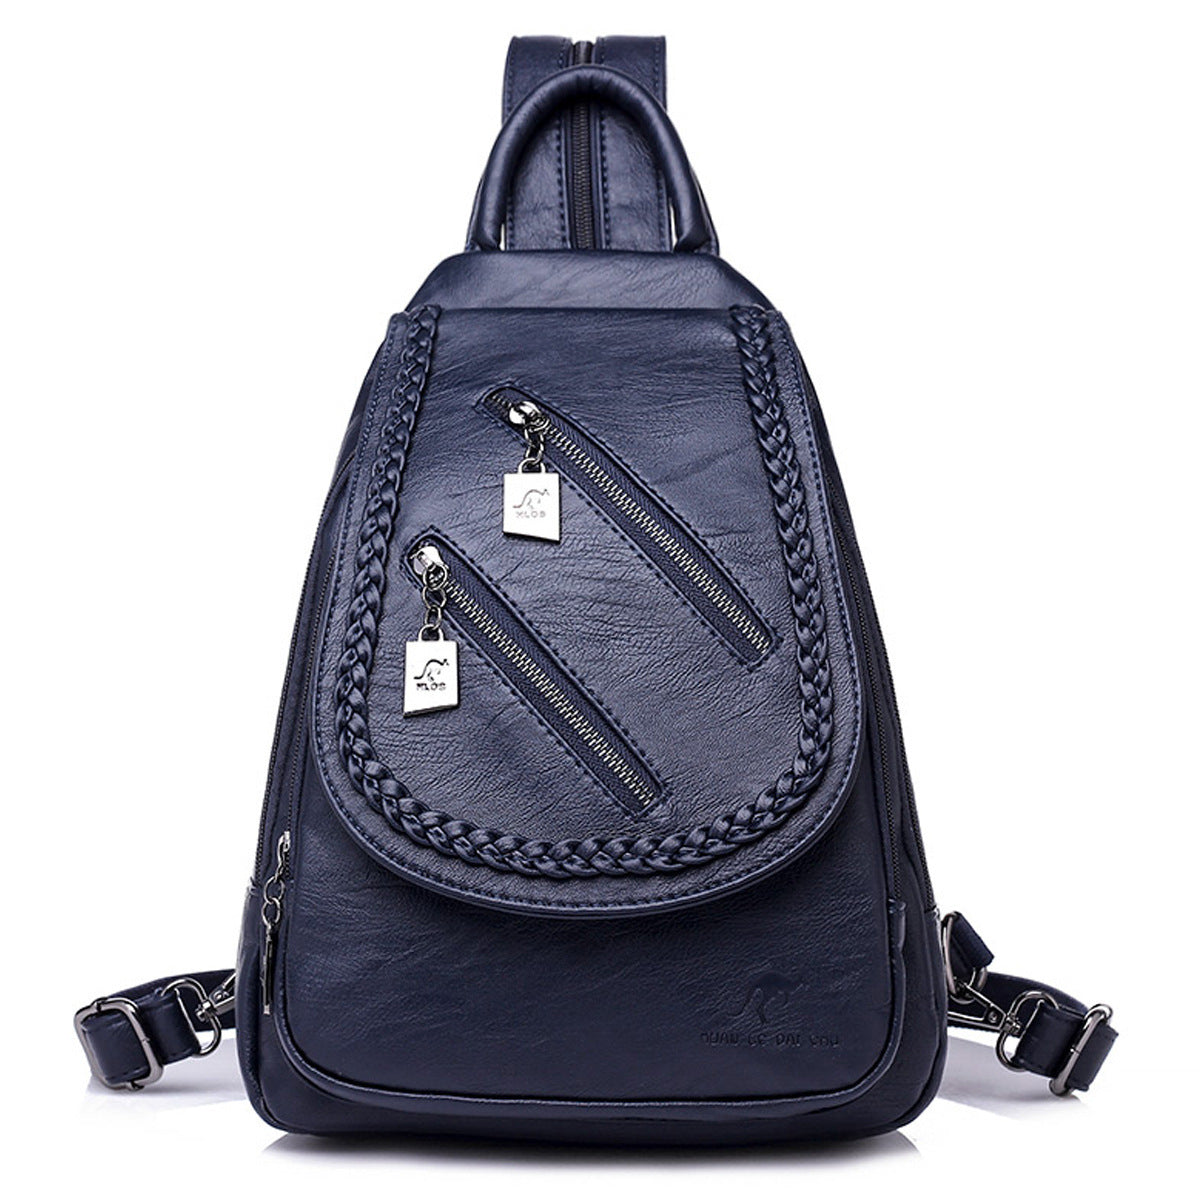 Optimize product title: "Versatile Large Capacity Soft Leather Student Backpack - Outdoor Travel Bag for Women"